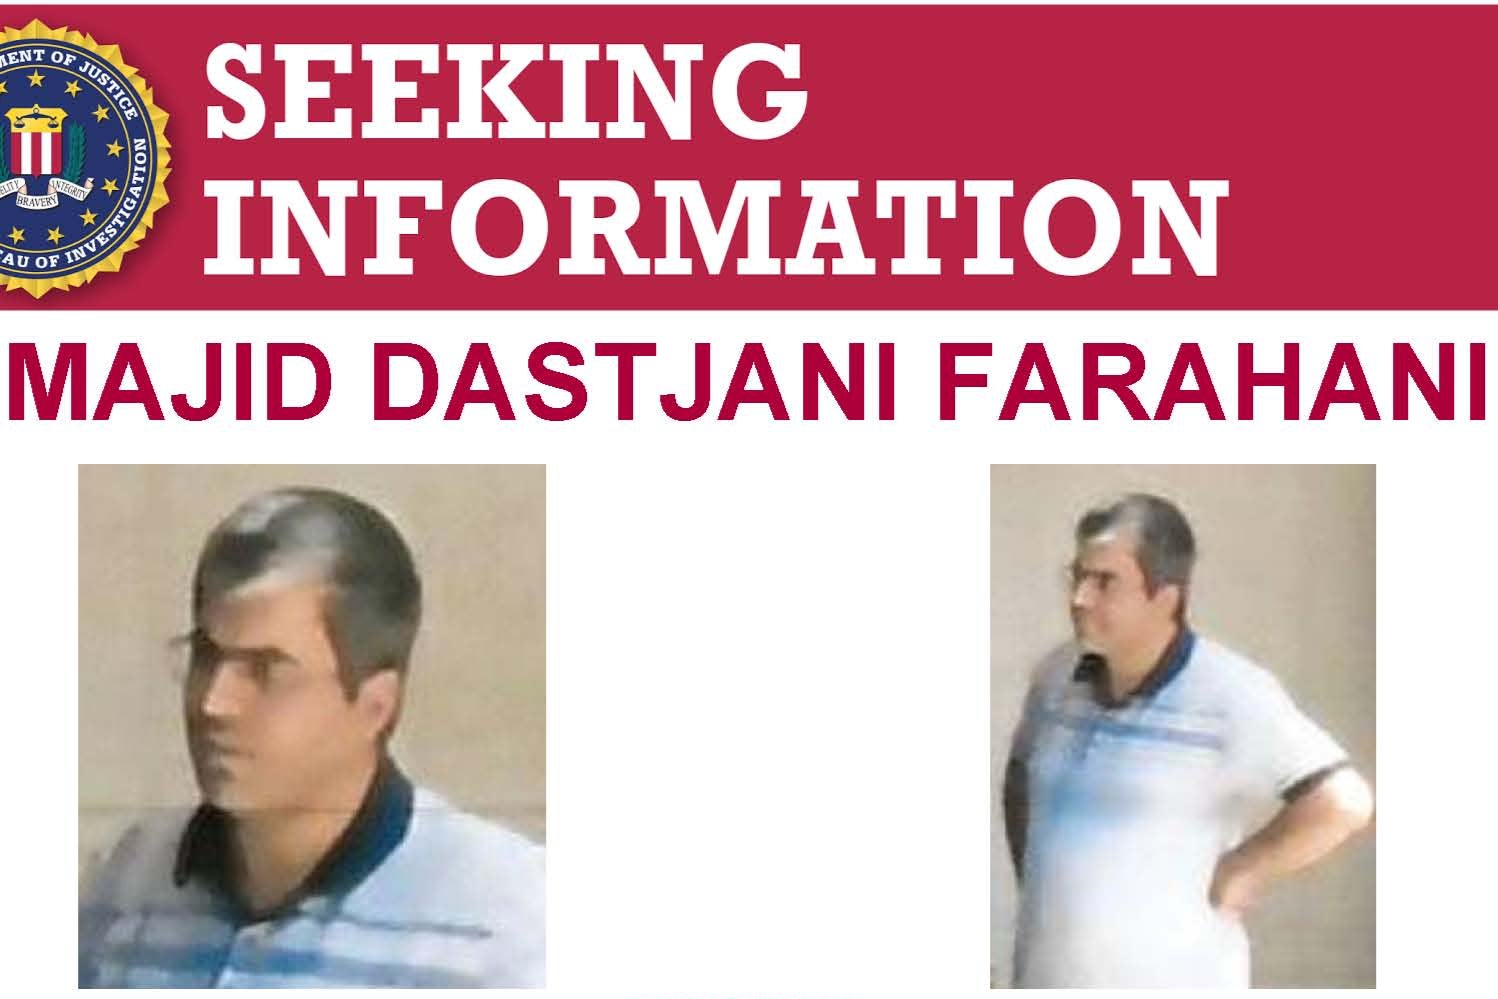 Majid Dastjani Farahani is wanted by the FBI in Miami over alleged plots to kill US officials